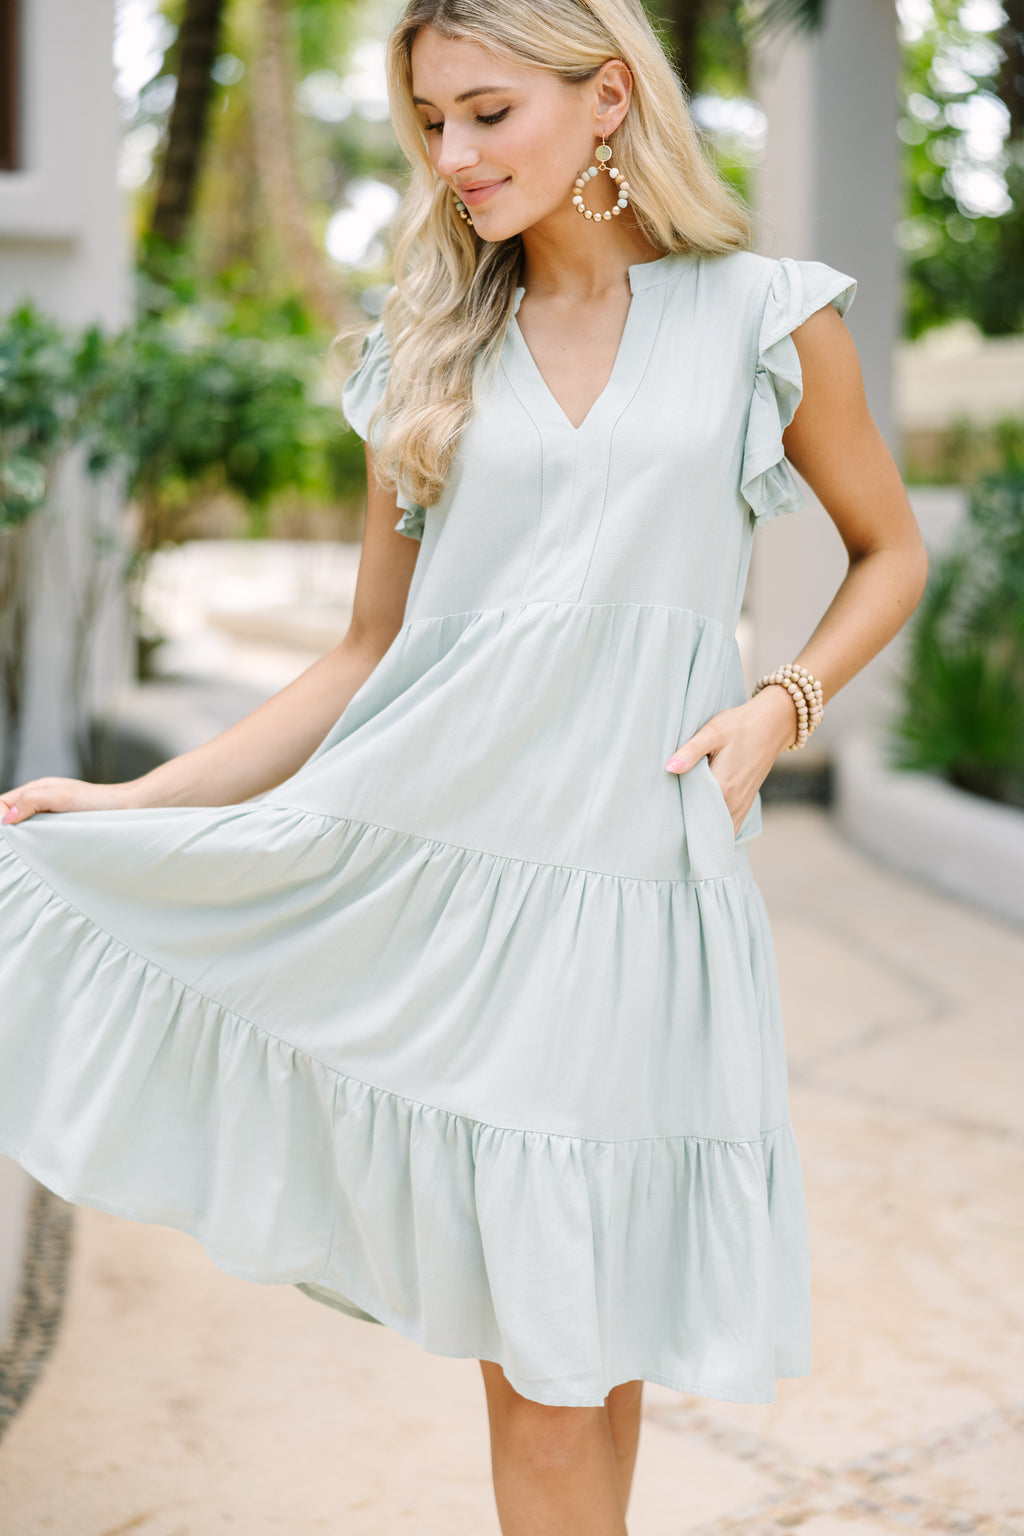 Make It Your Own Sage Green Tiered Dress – Shop the Mint